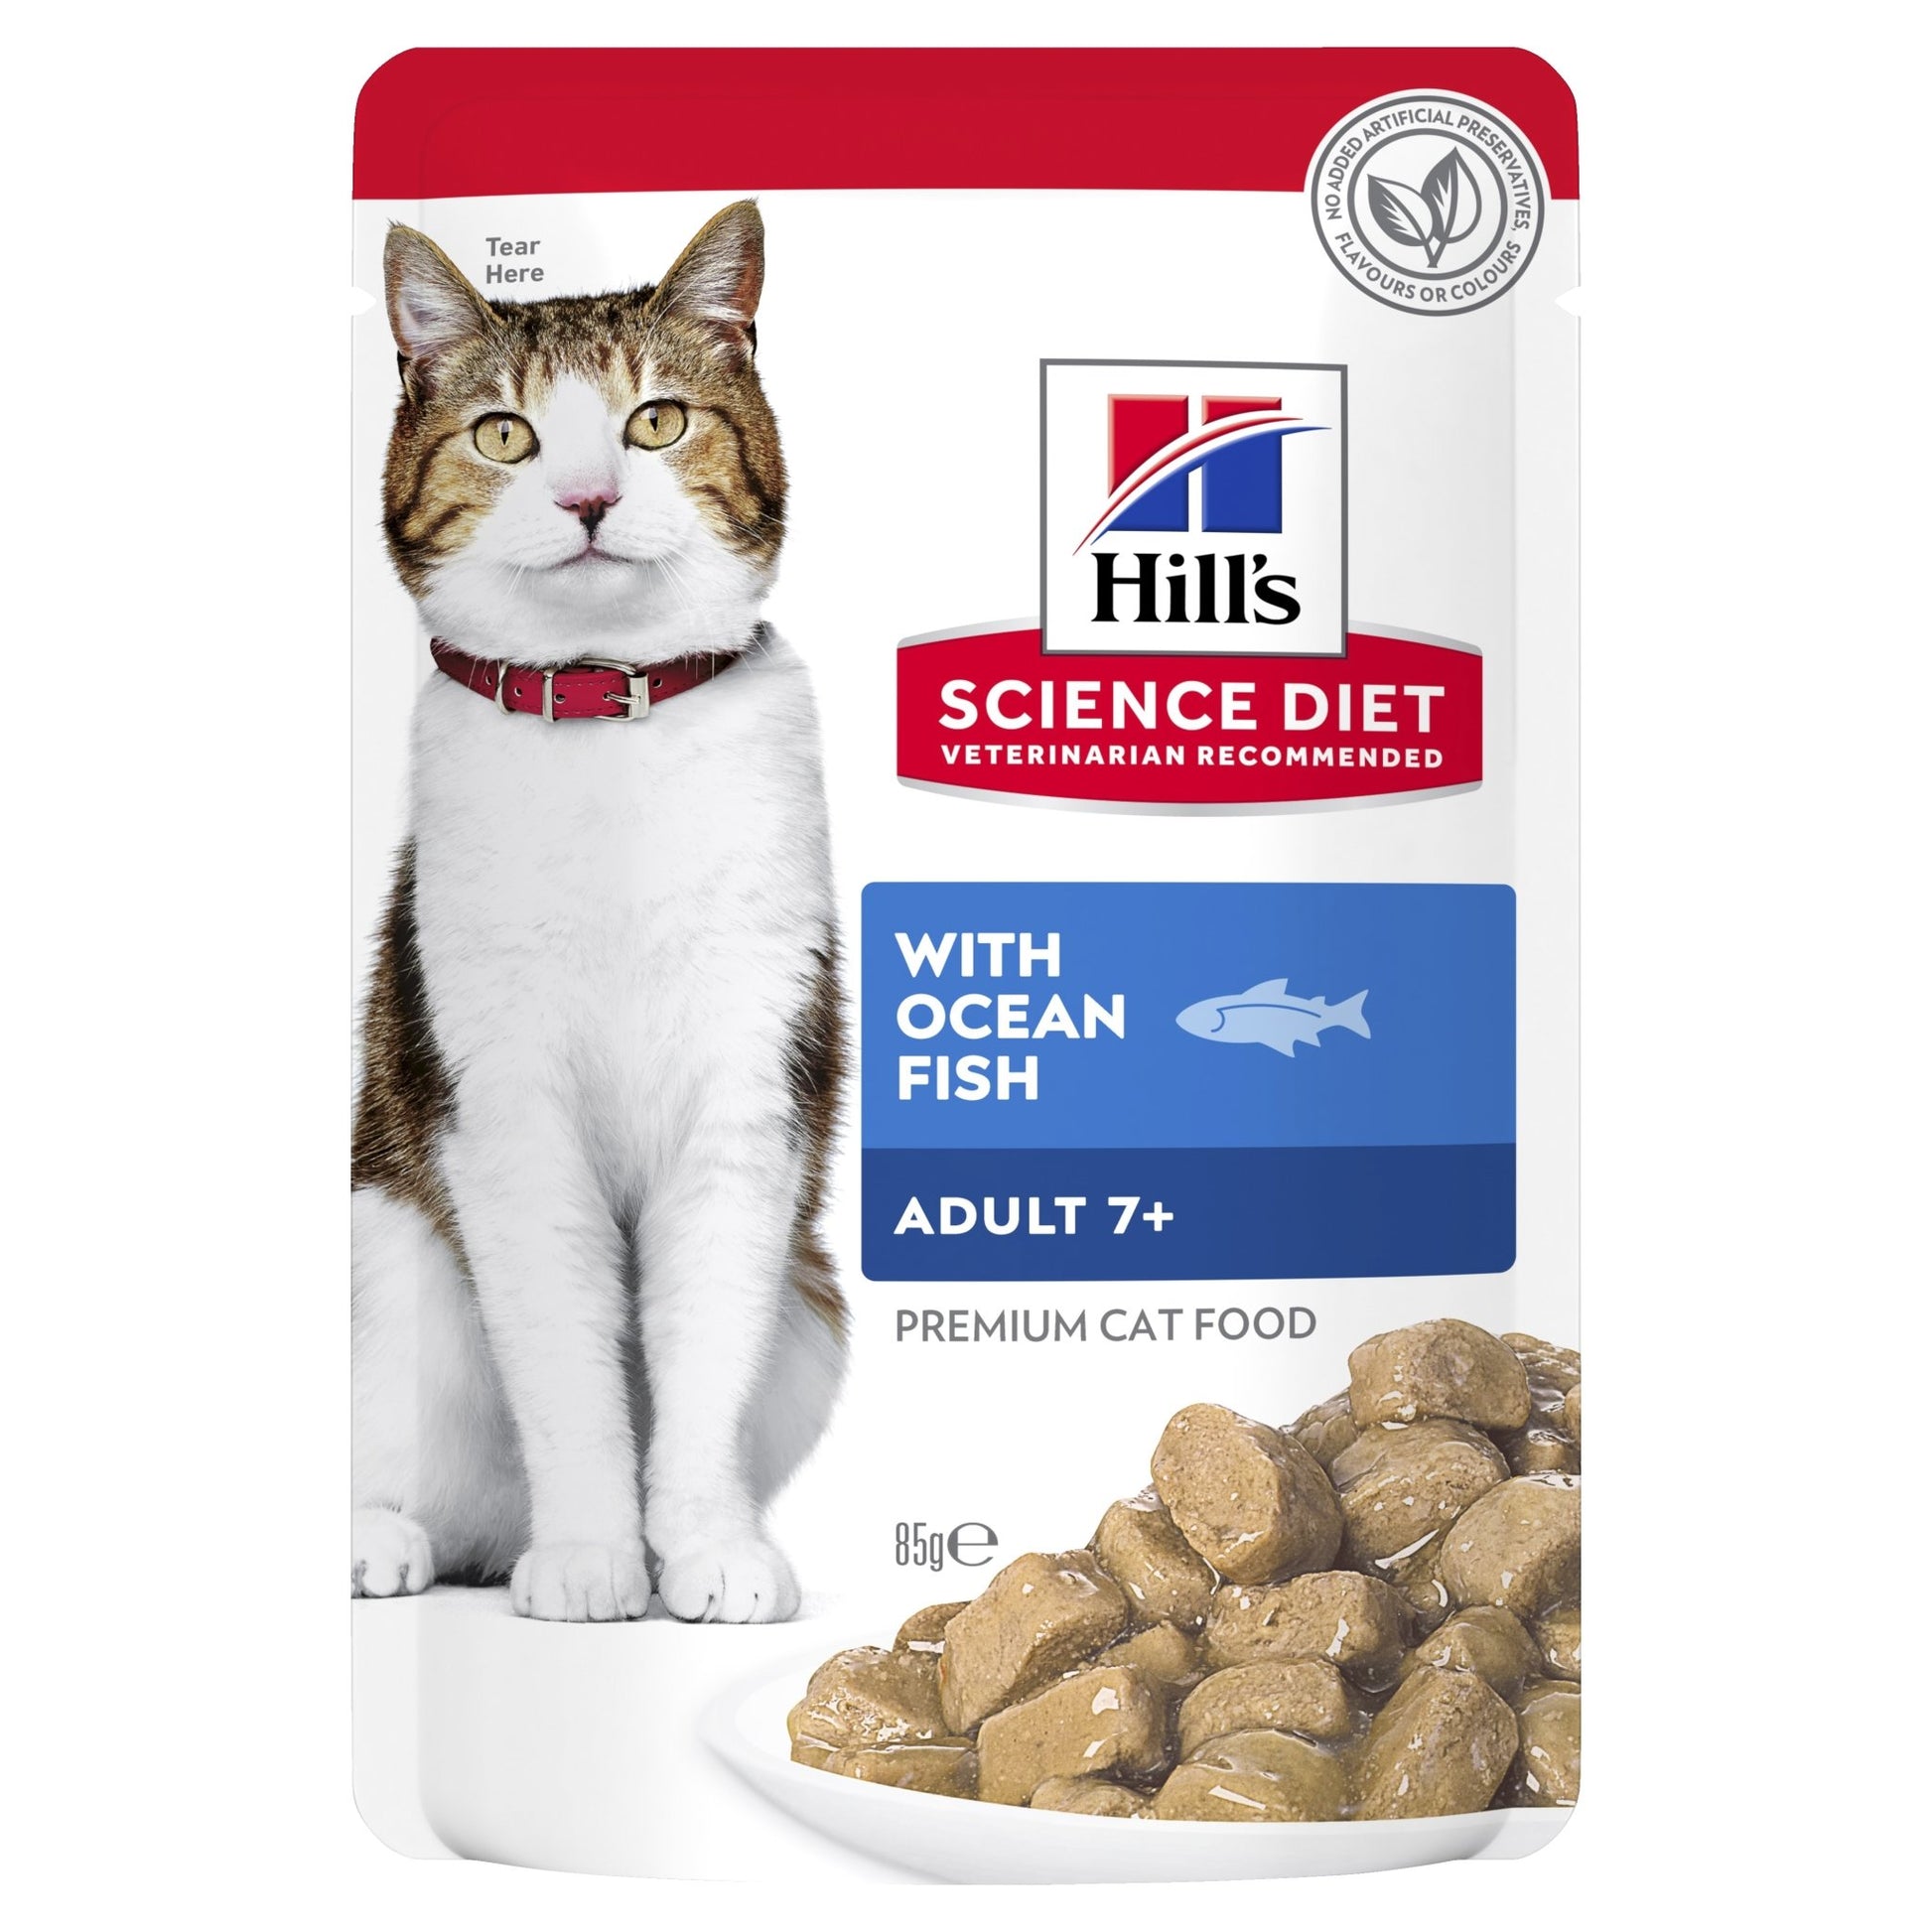 Hill's Science Diet Adult 7+ Active Longevity Ocean Fish Cat Food pouches 12x85g - Woonona Petfood & Produce